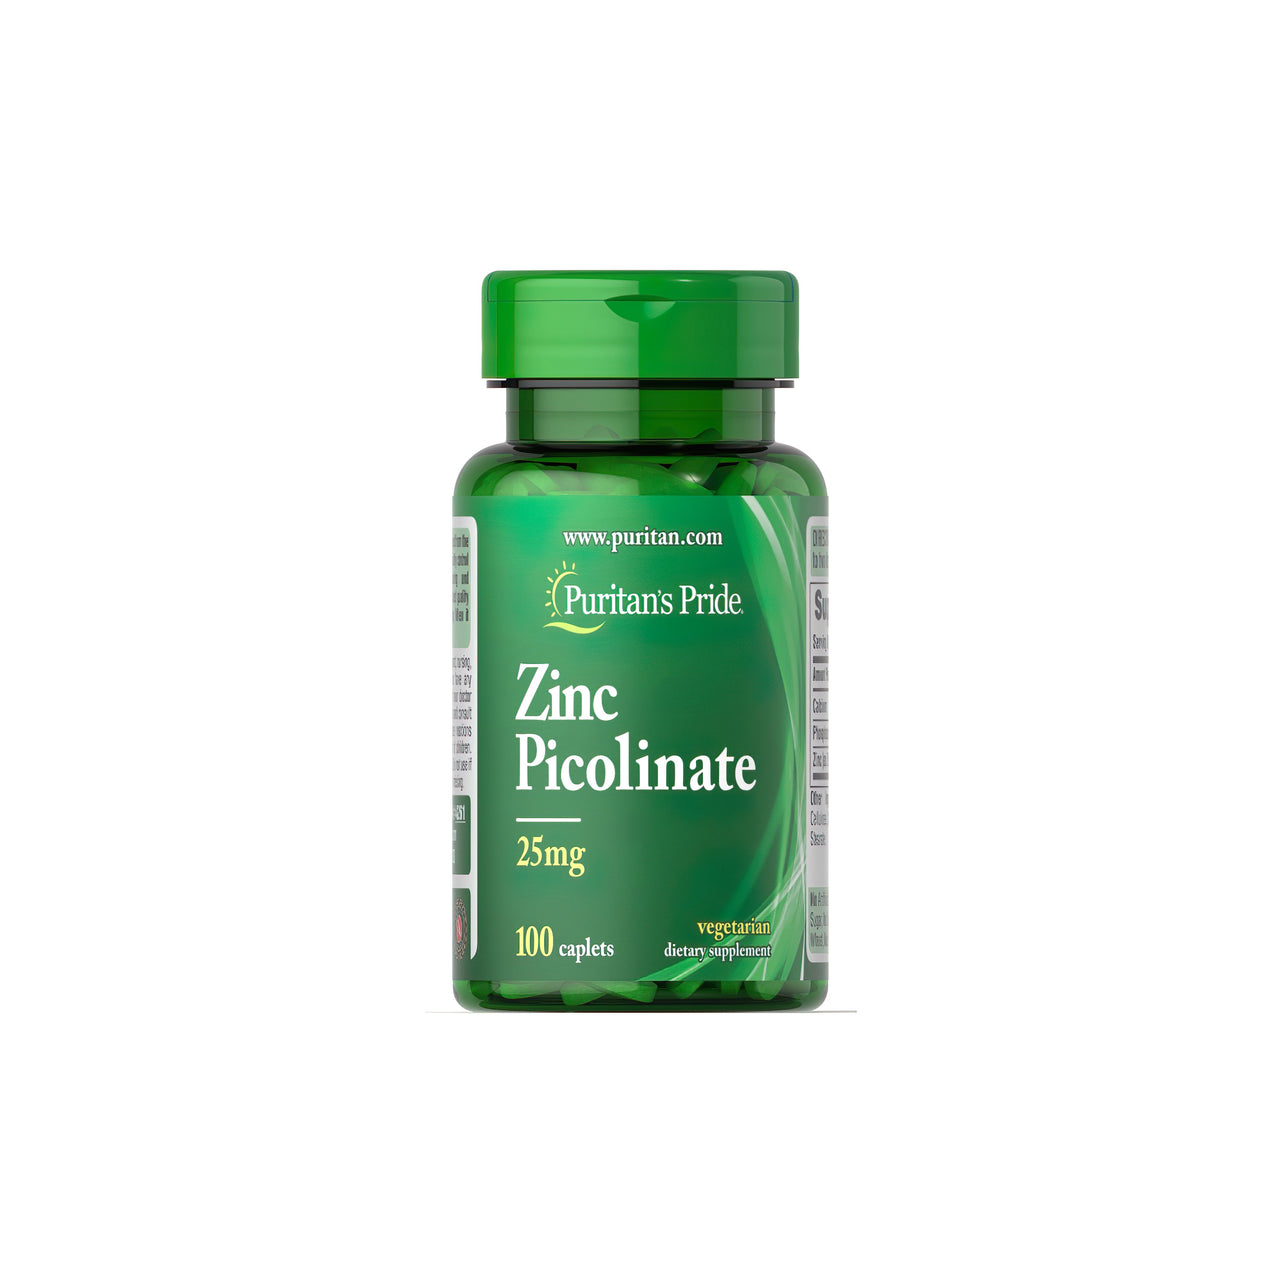 A health-promoting bottle of Puritan's Pride Zinc Picolinate 25mg 100 Caplets for radiant skin.